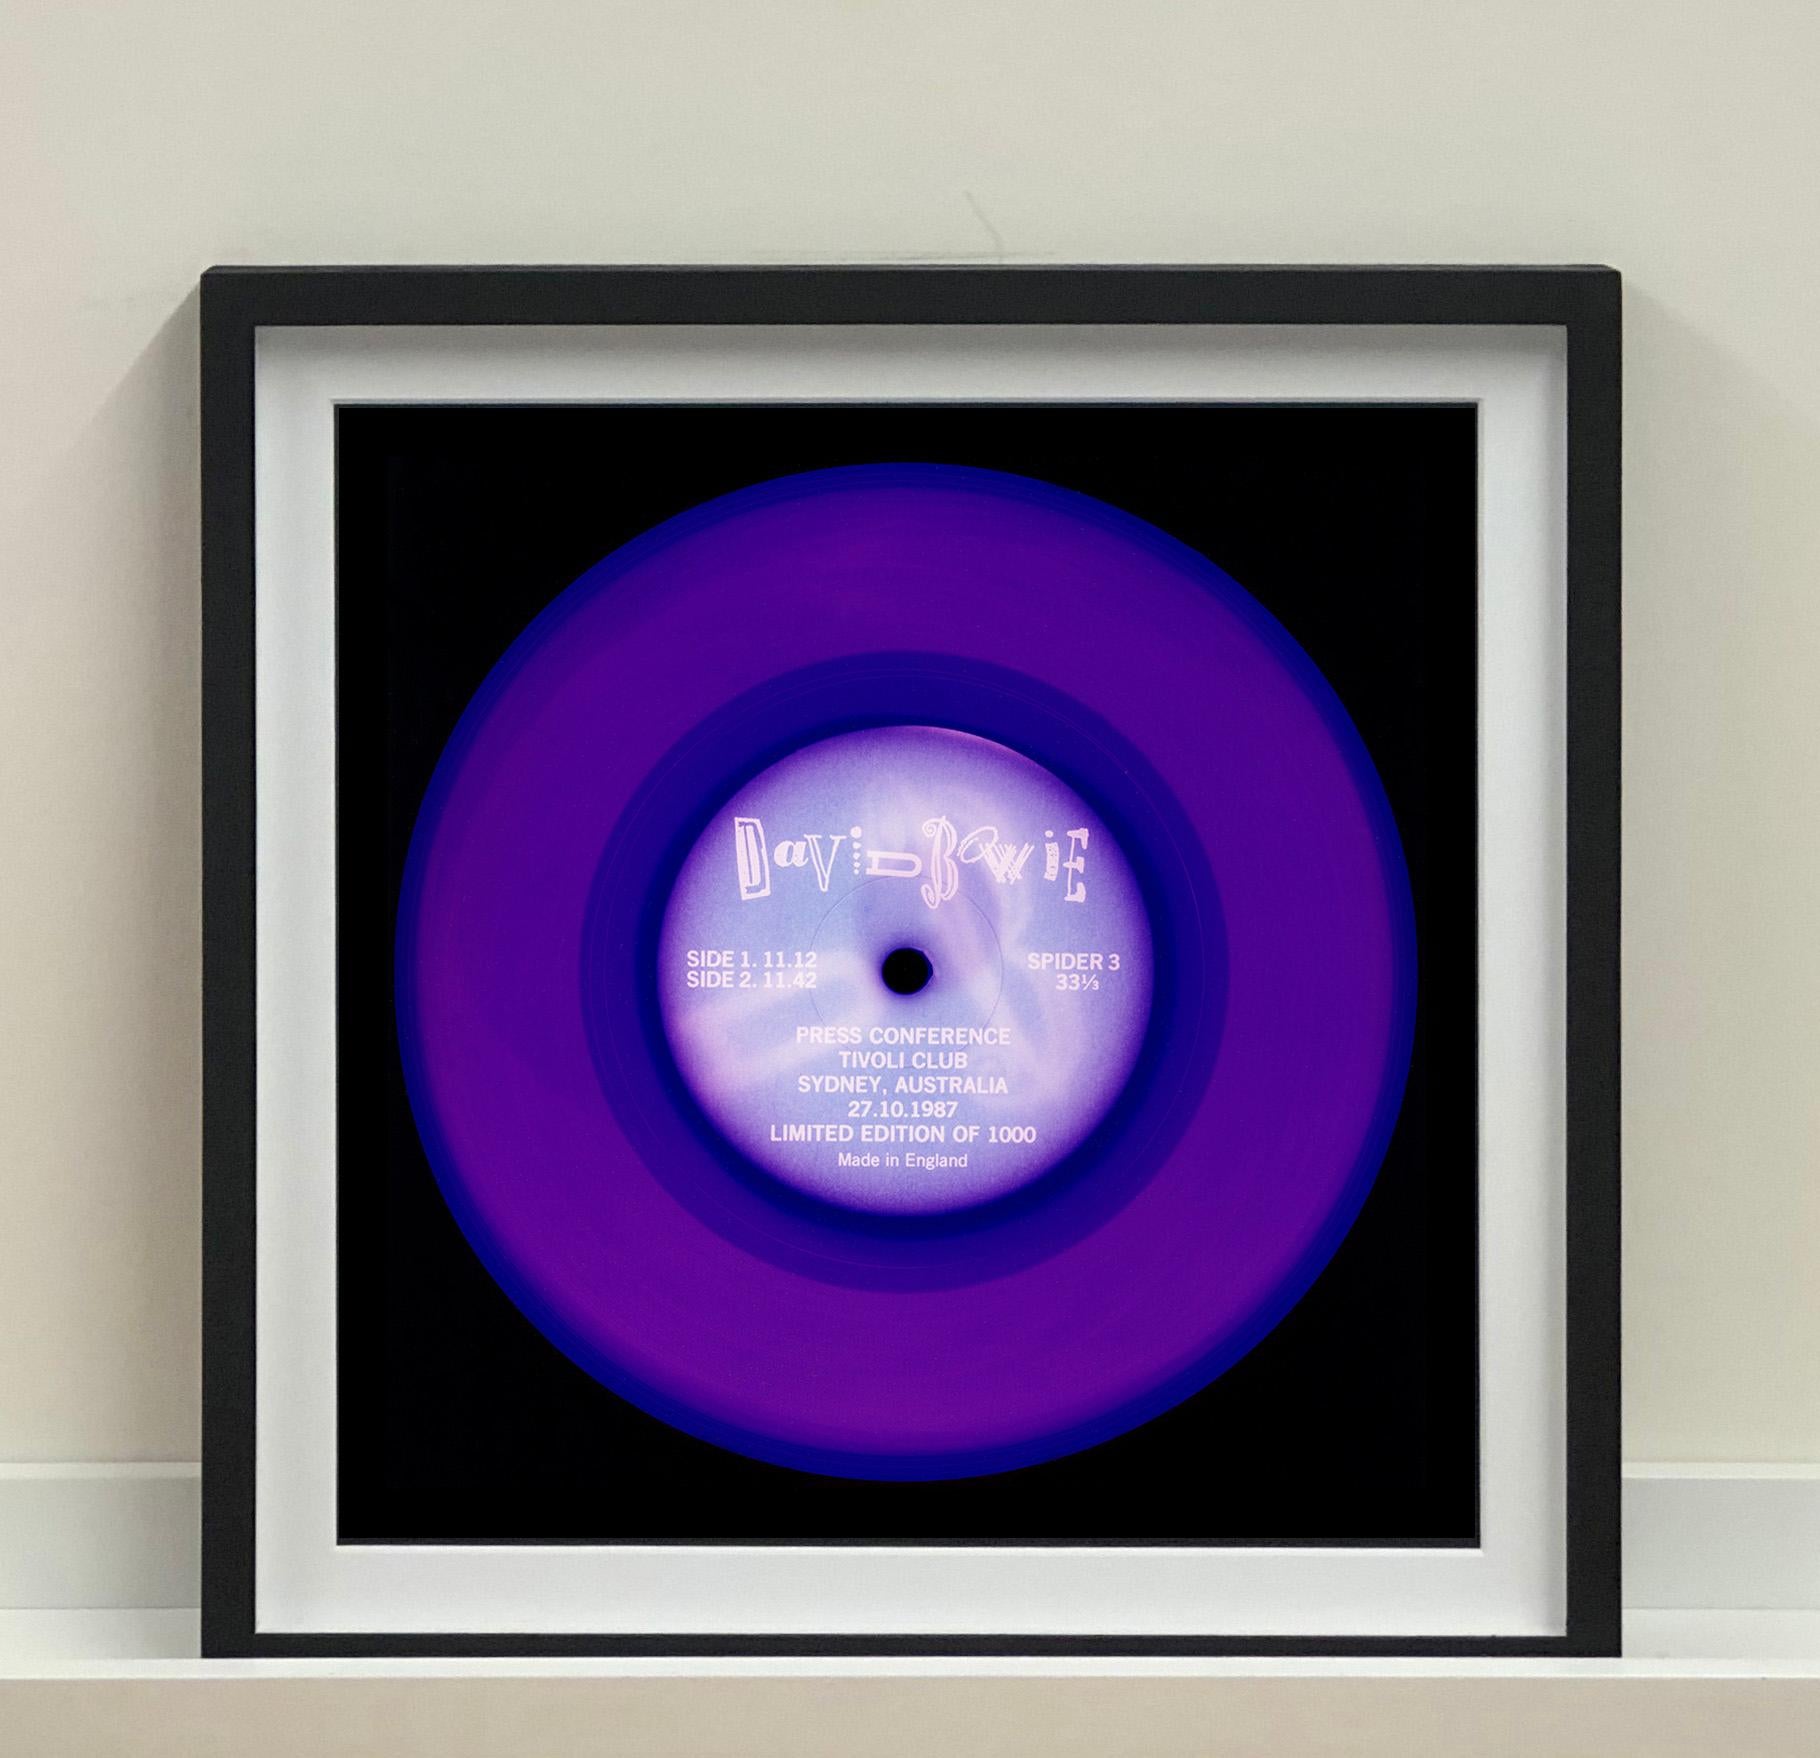 Vinyl Collection, Press Conference - Purple, Conceptual, Pop Art, Photography - Print by Heidler & Heeps